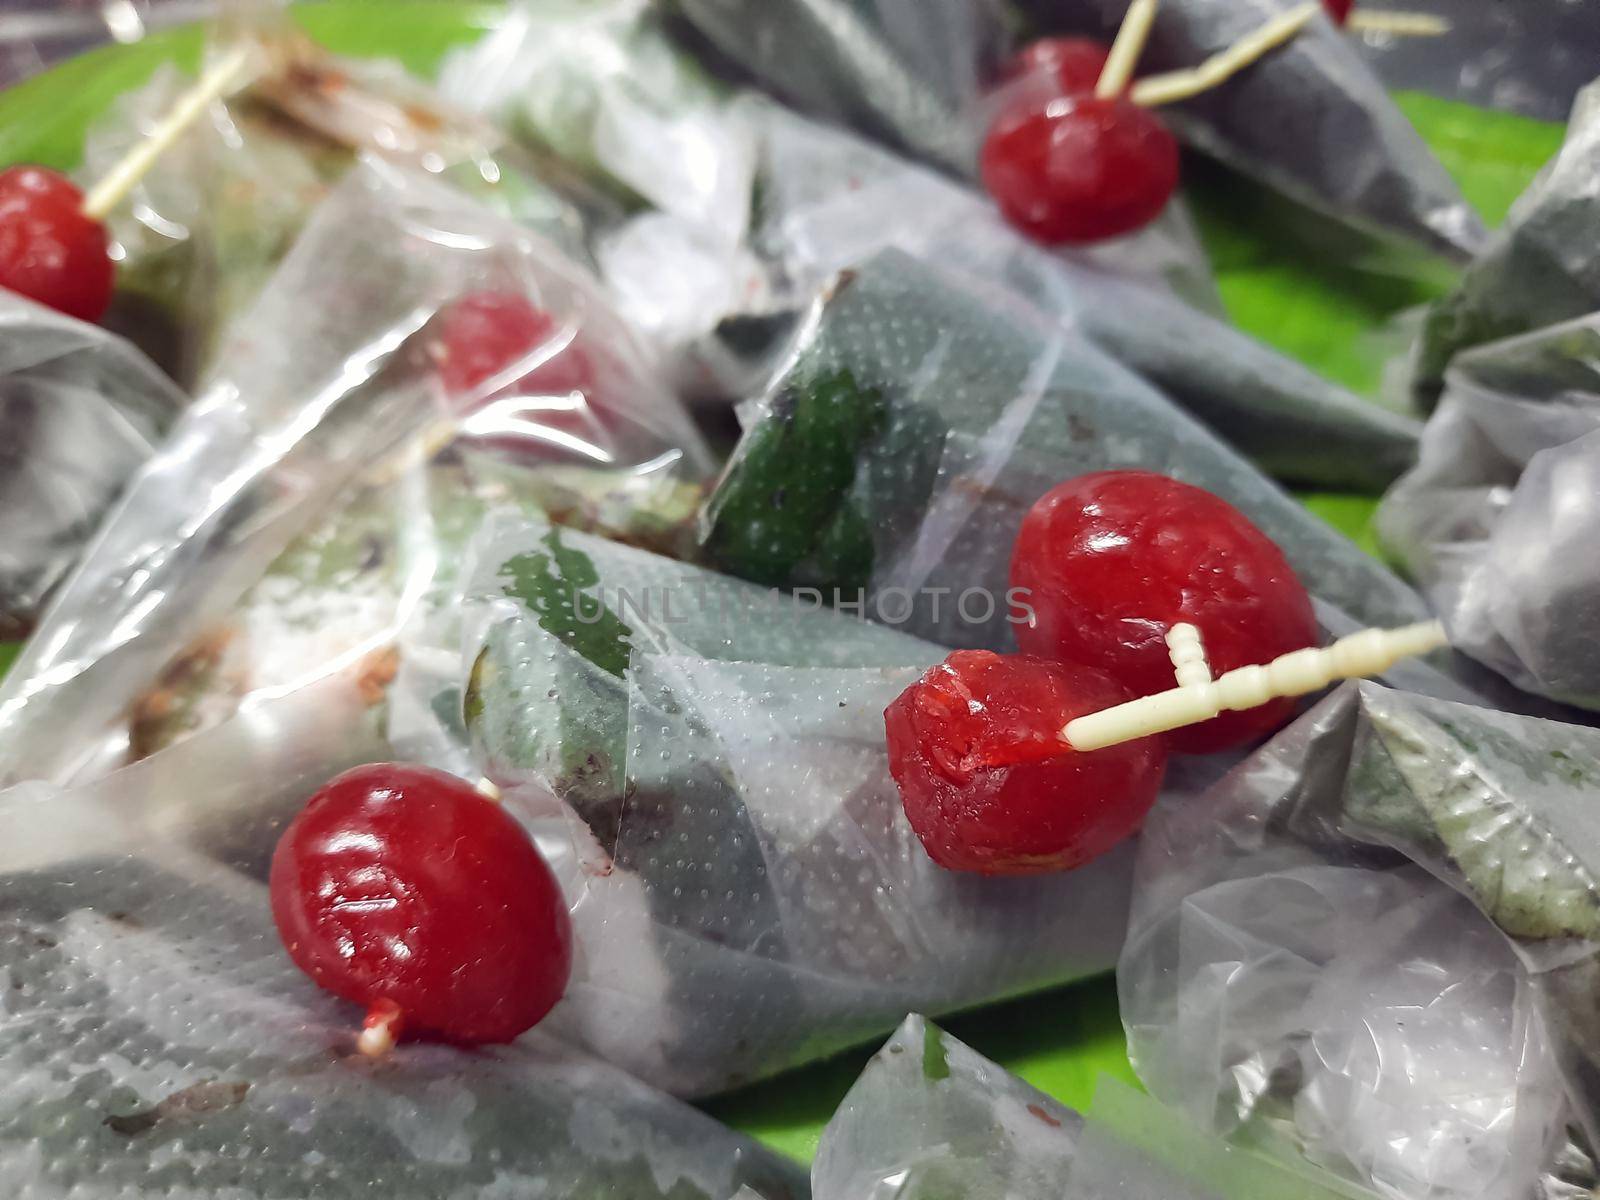 sweet paan wrapped in betel leaf, often used as an after dinner digestive. by tabishere